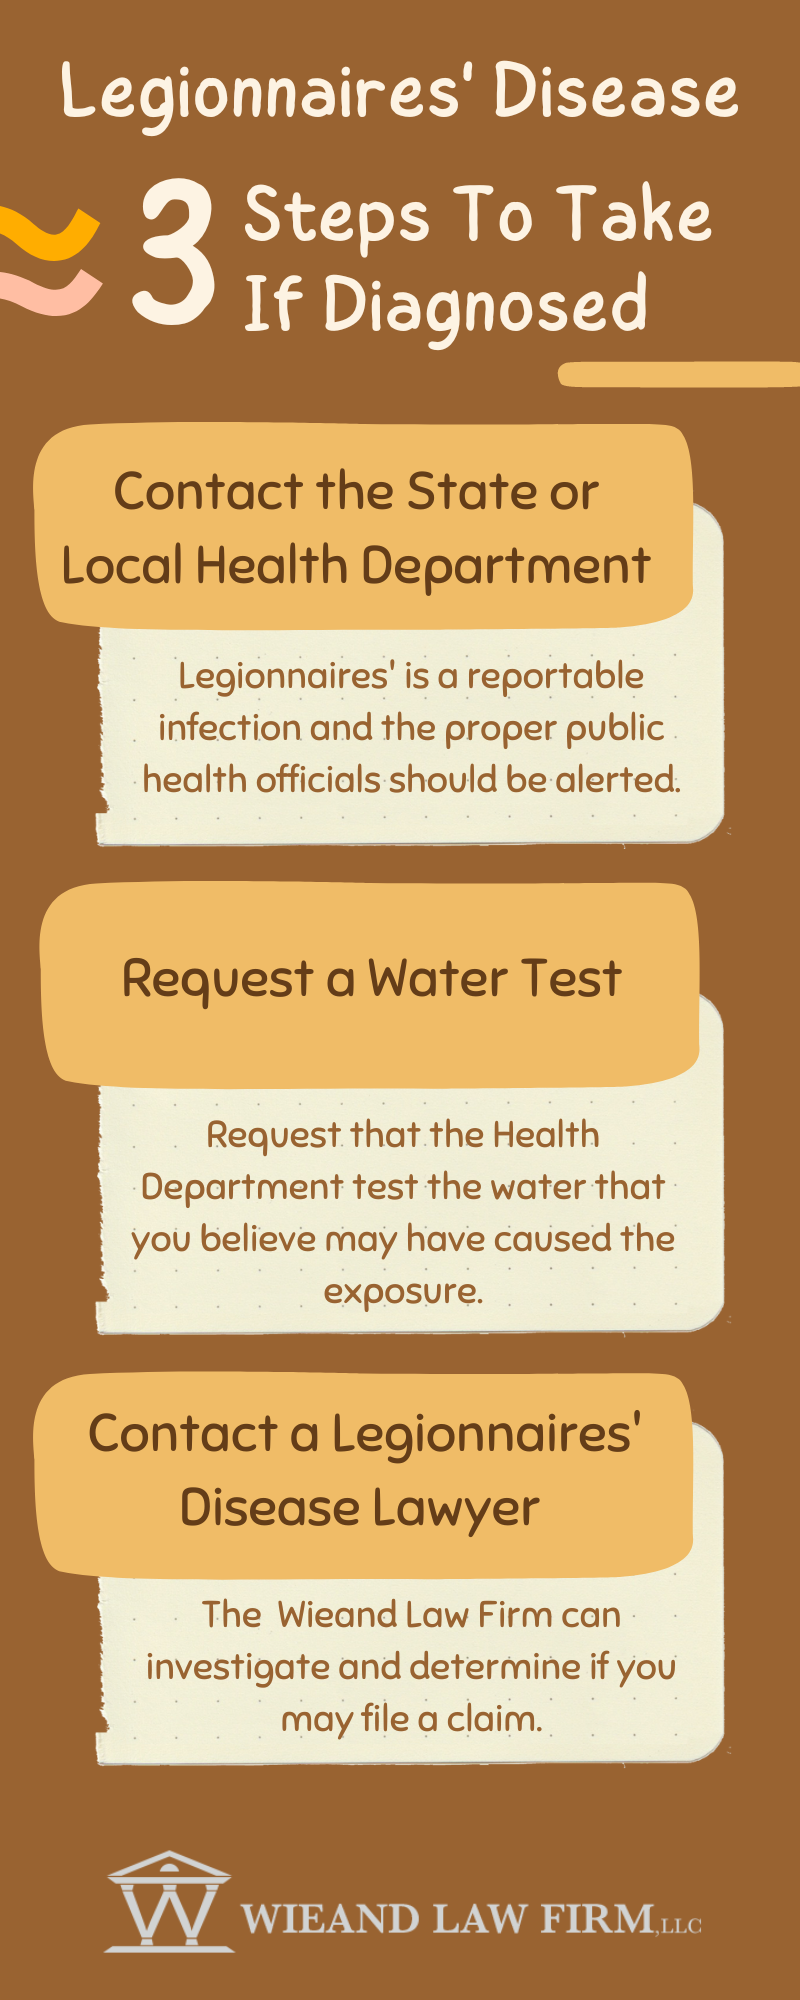 3 Steps to take if diagnosed with Legionnaires' Disease